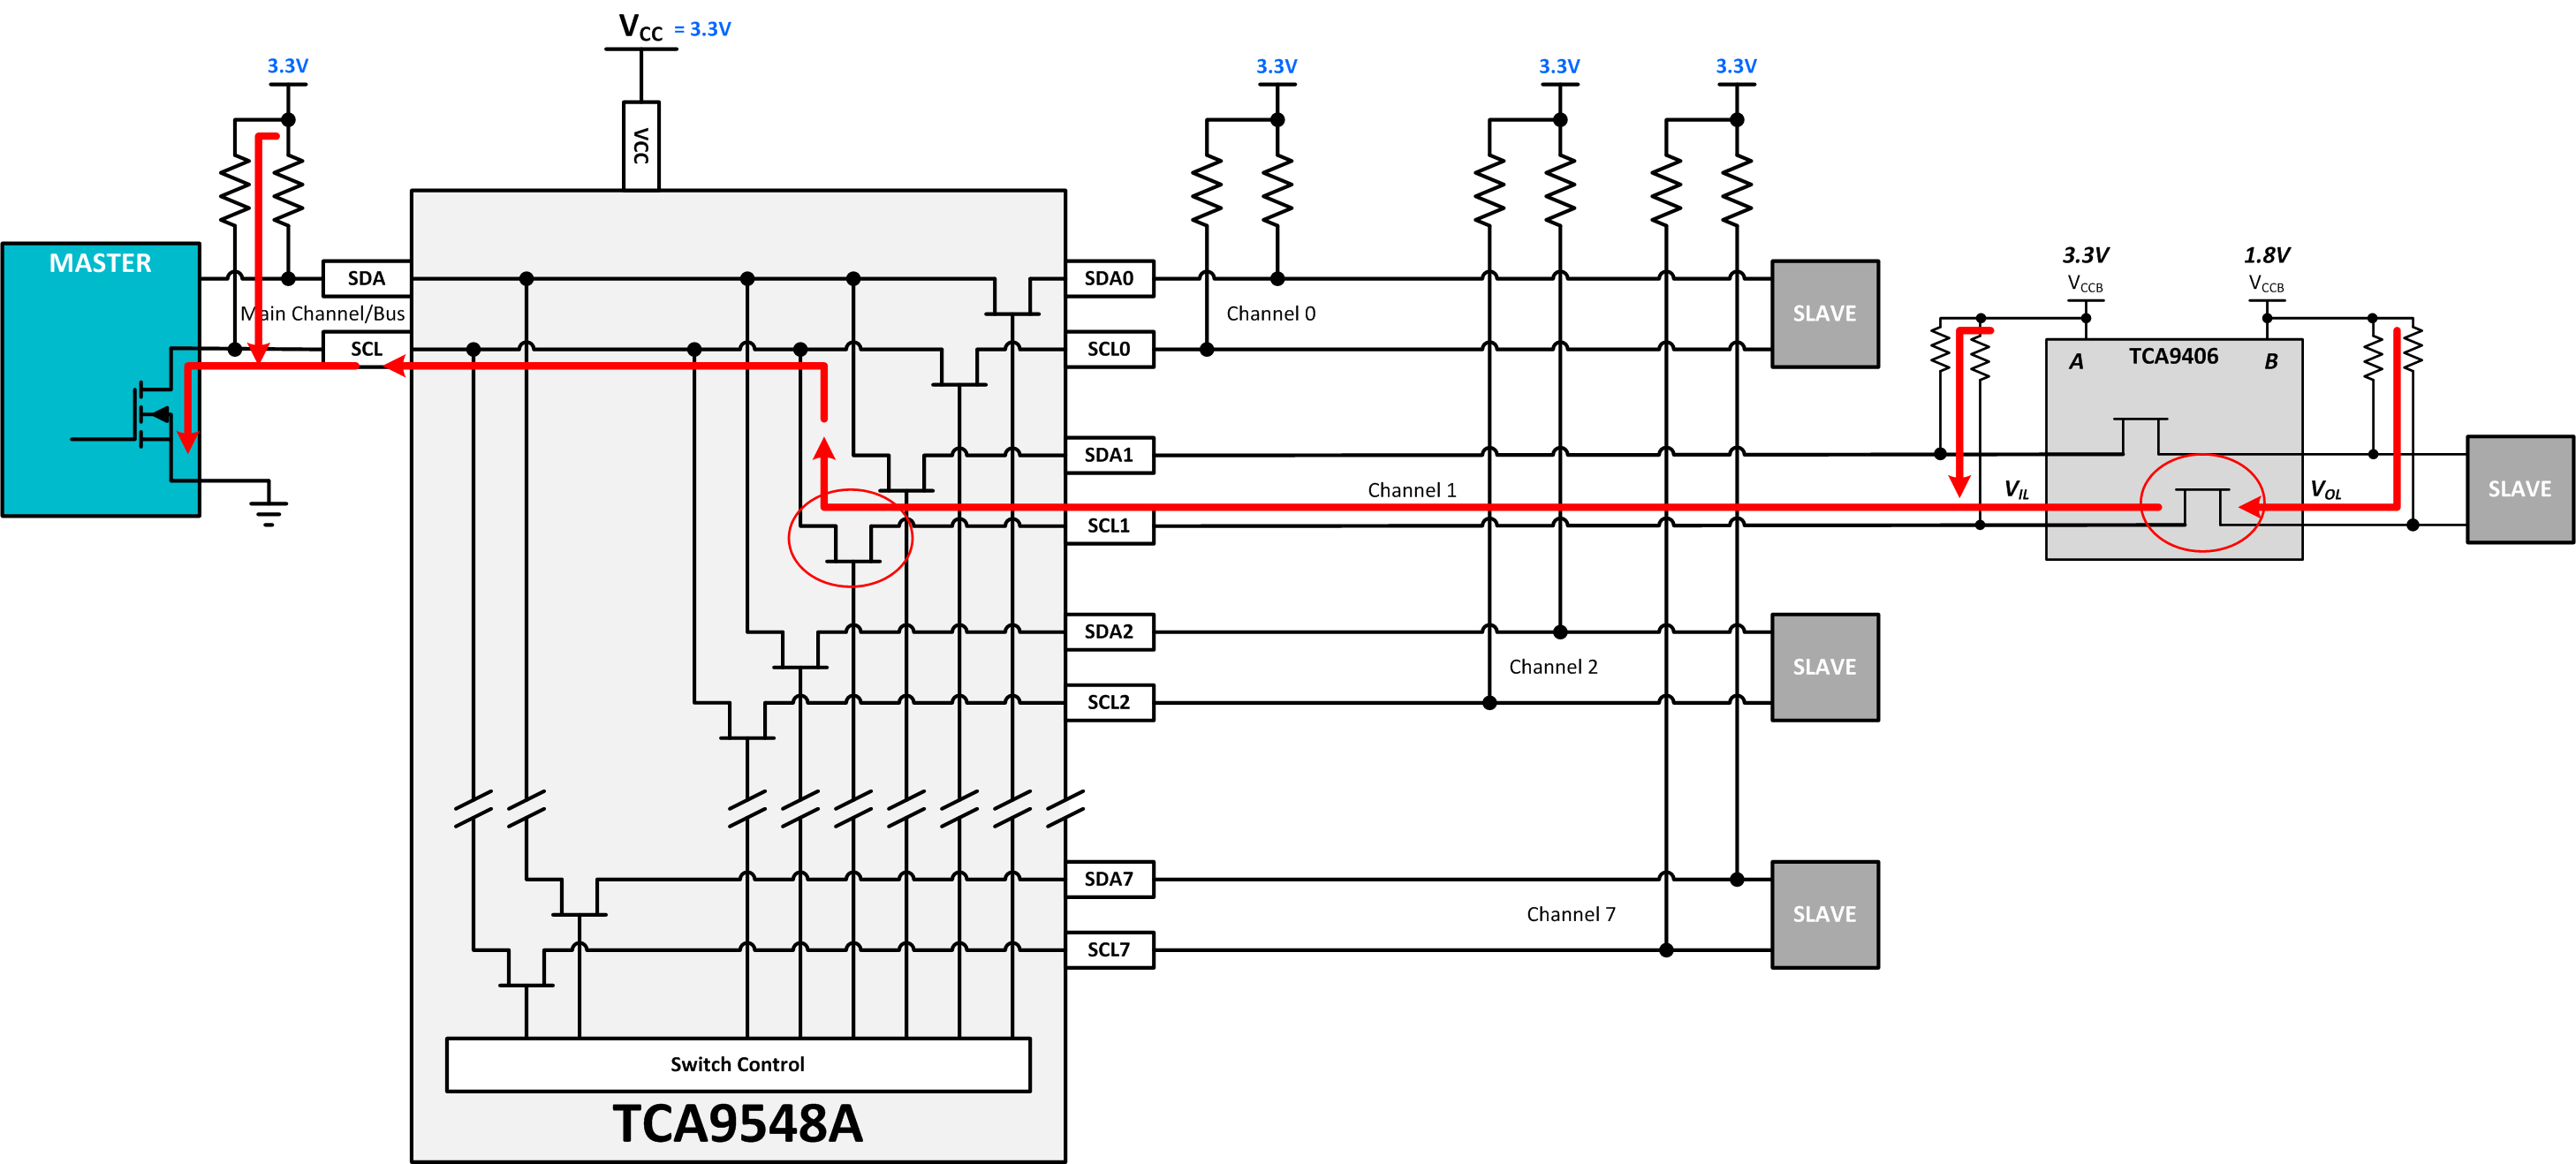 PCA9548A: Master and Slave side I2C line total pull-up resistor calculation  when channel x is selected - Interface forum - Interface - TI E2E support  forums